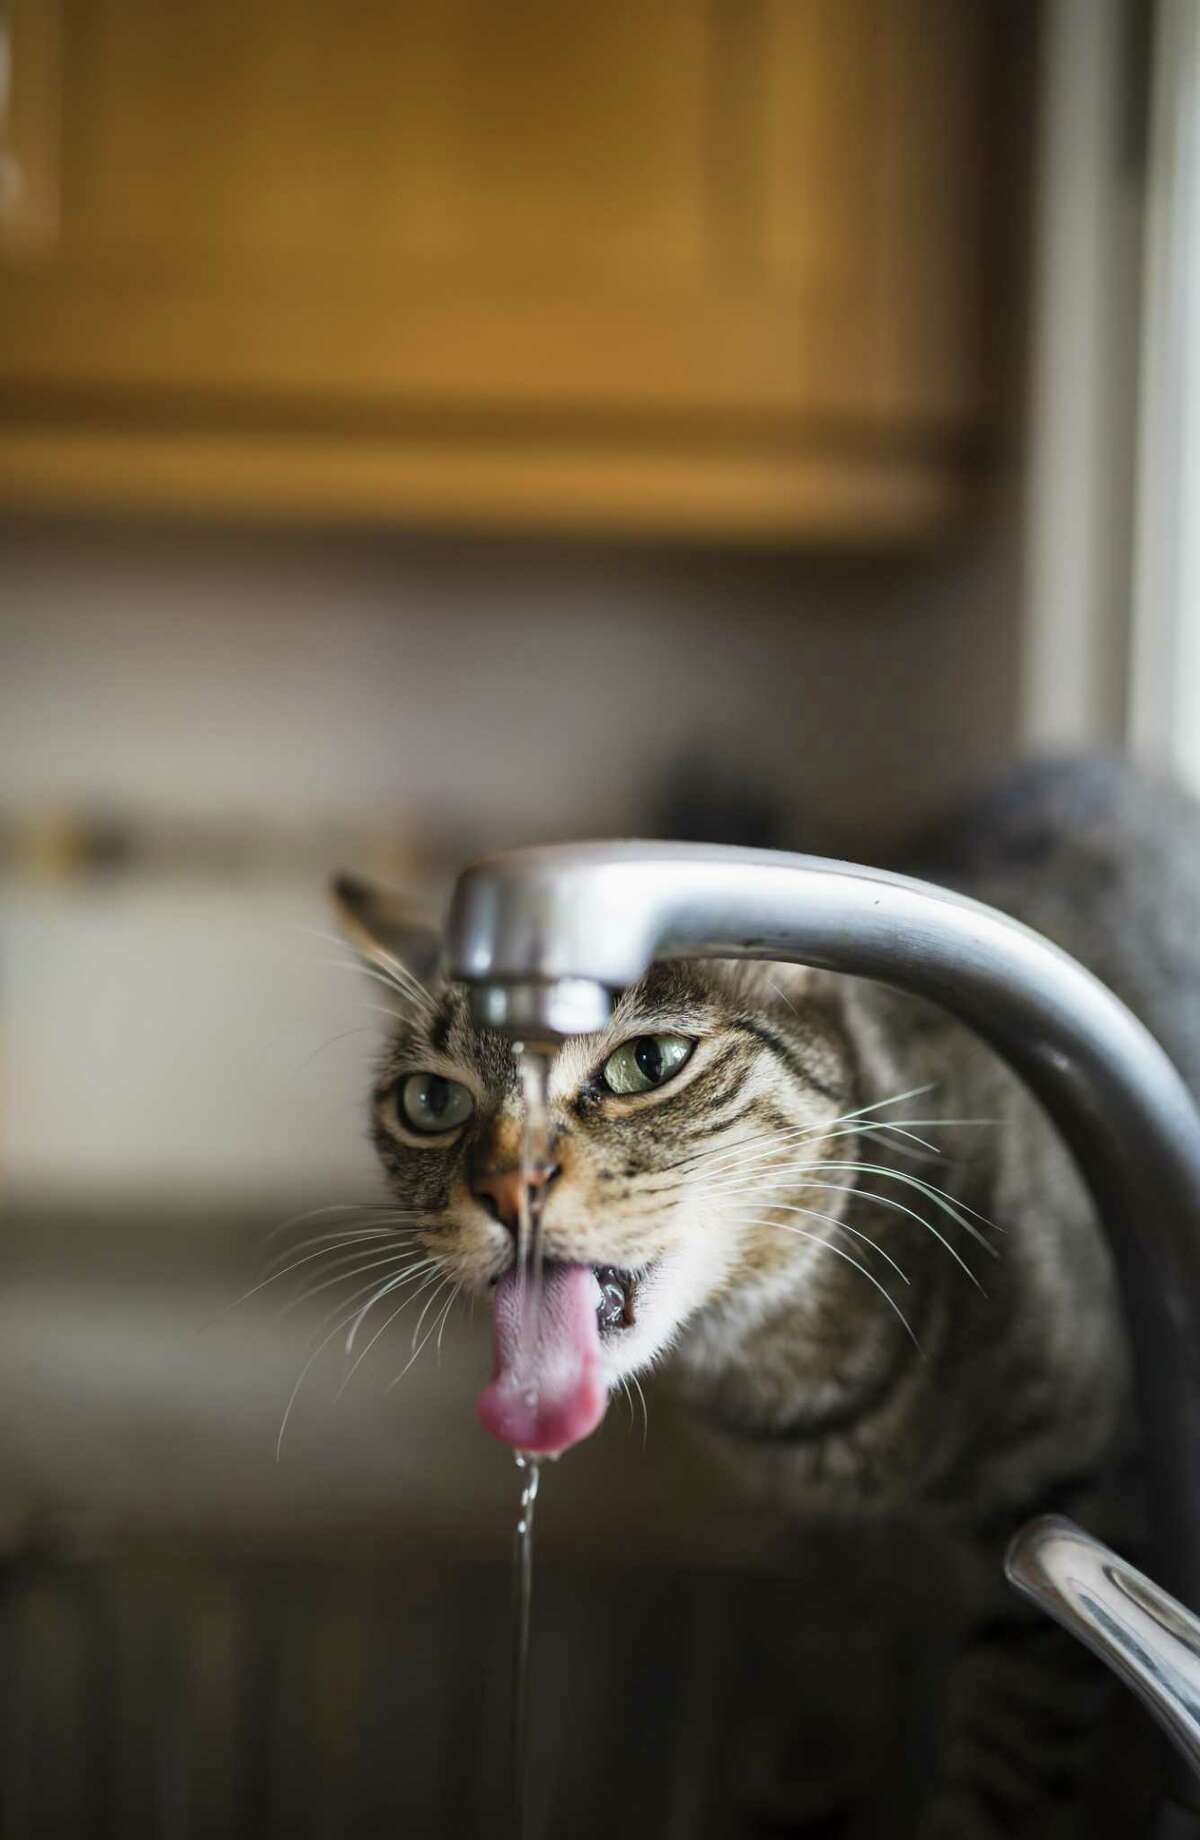 Addiction to faucet water can cost a cat its life.